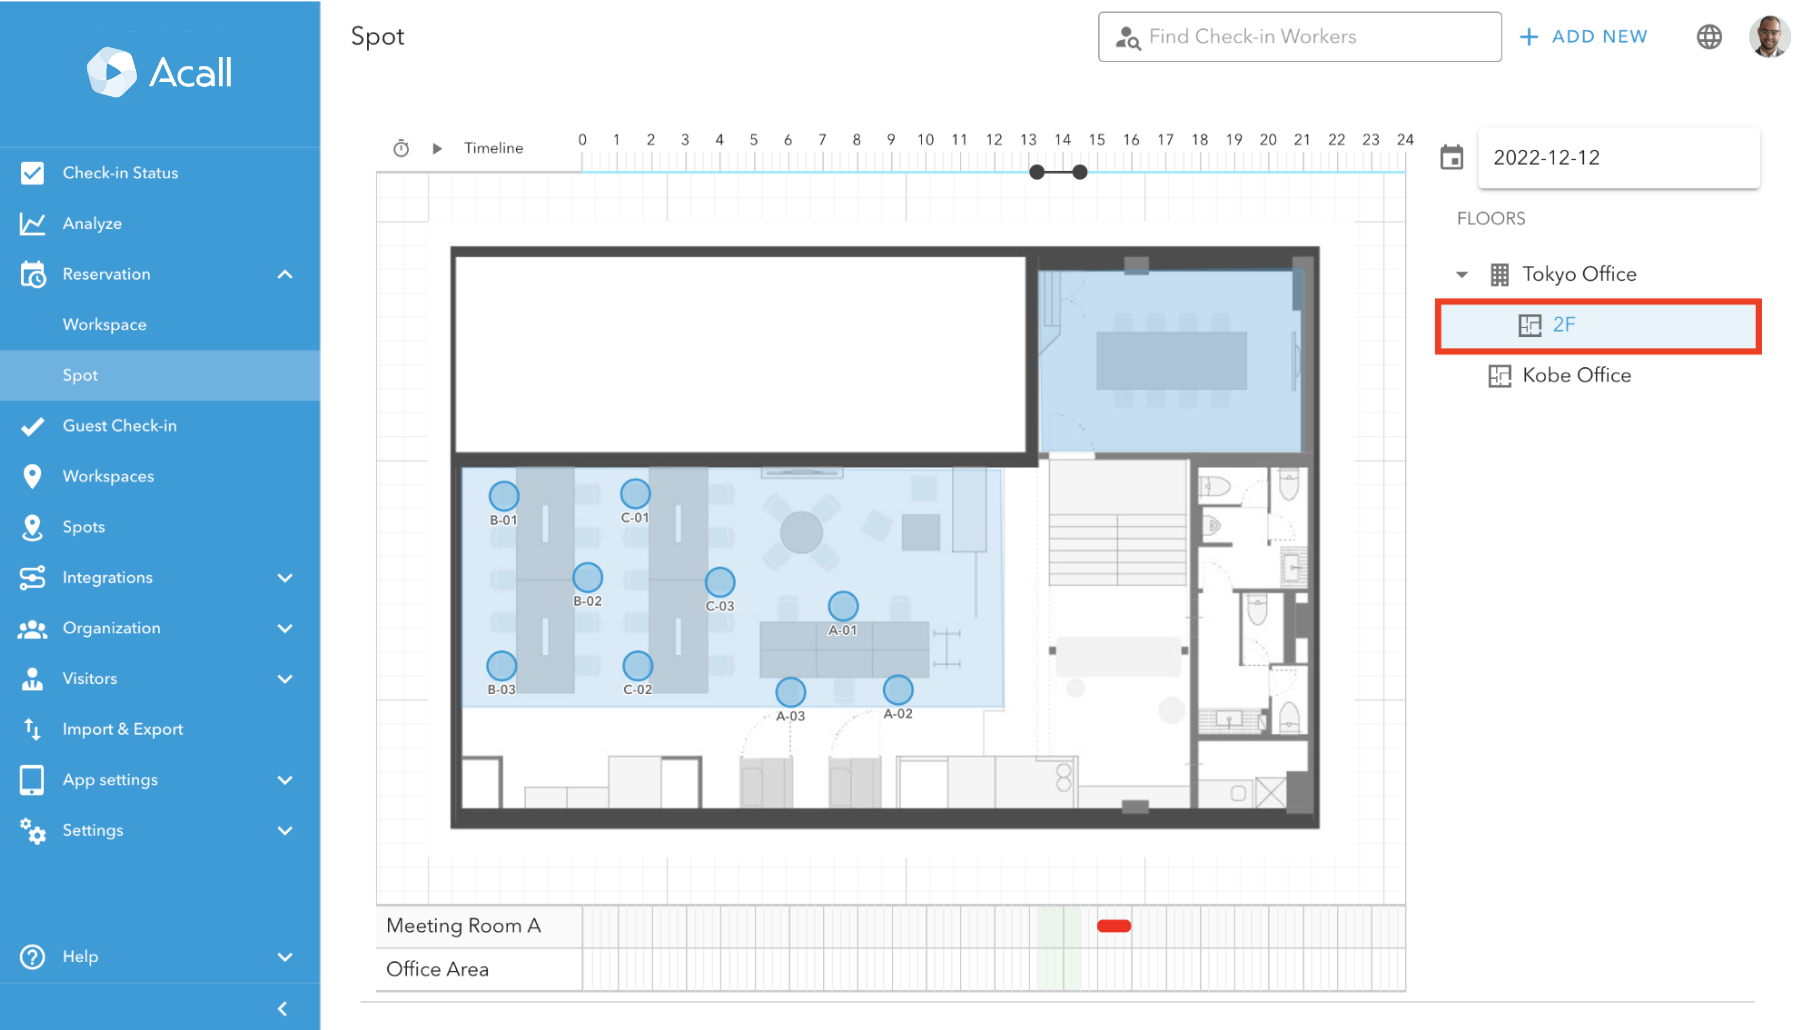 Reserve Your Spot on Floor Map on Acall Portal4.png